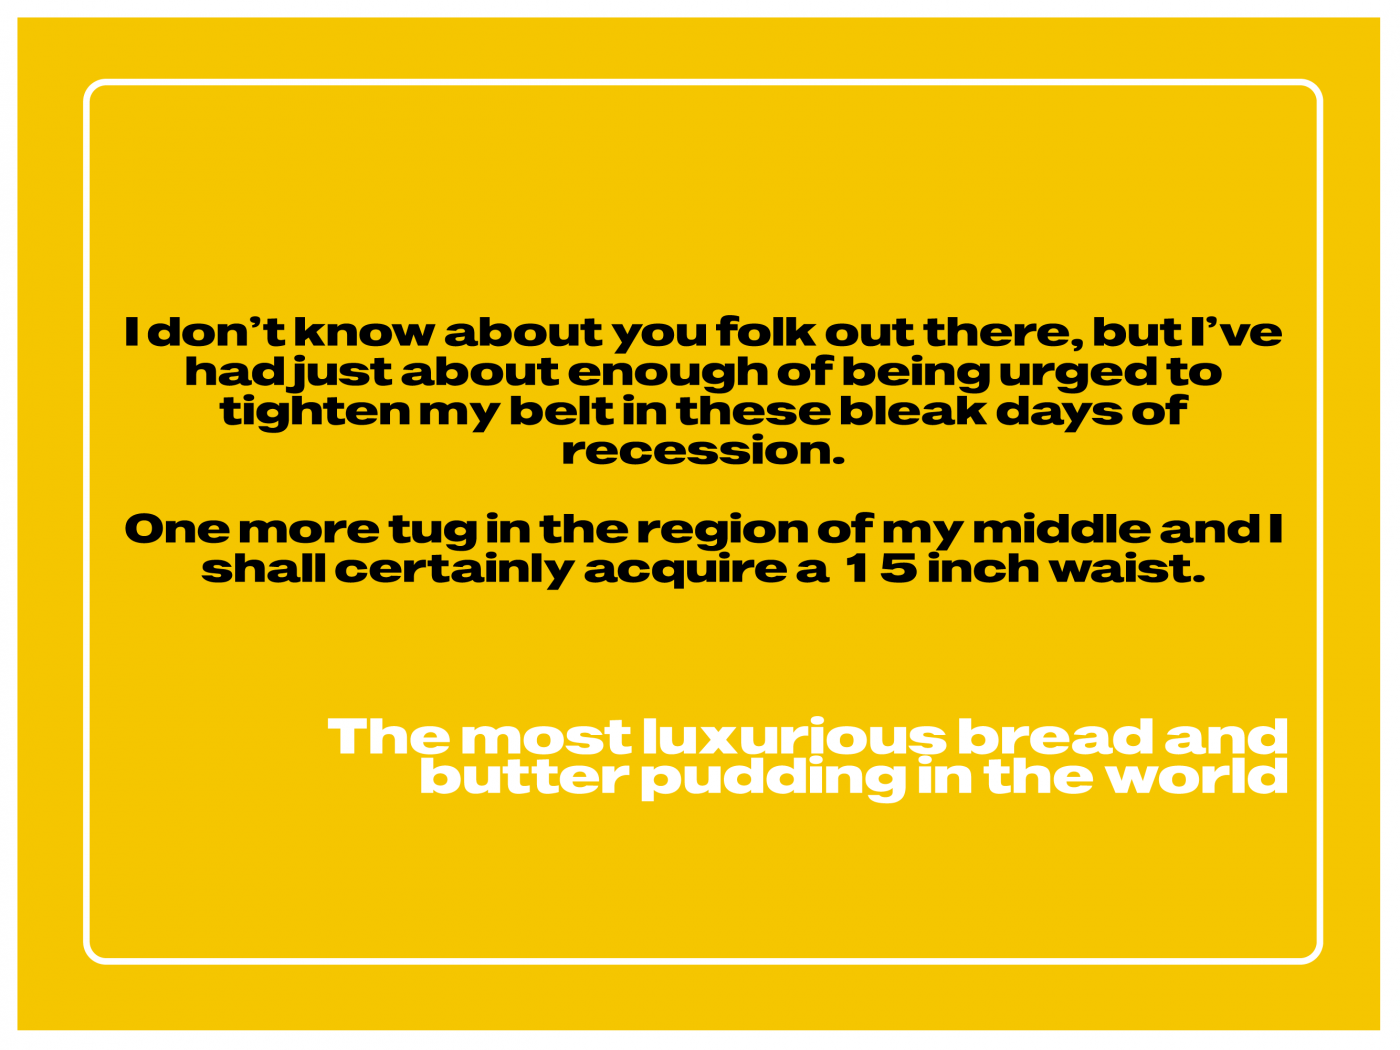 Society blog bread and butter pudding